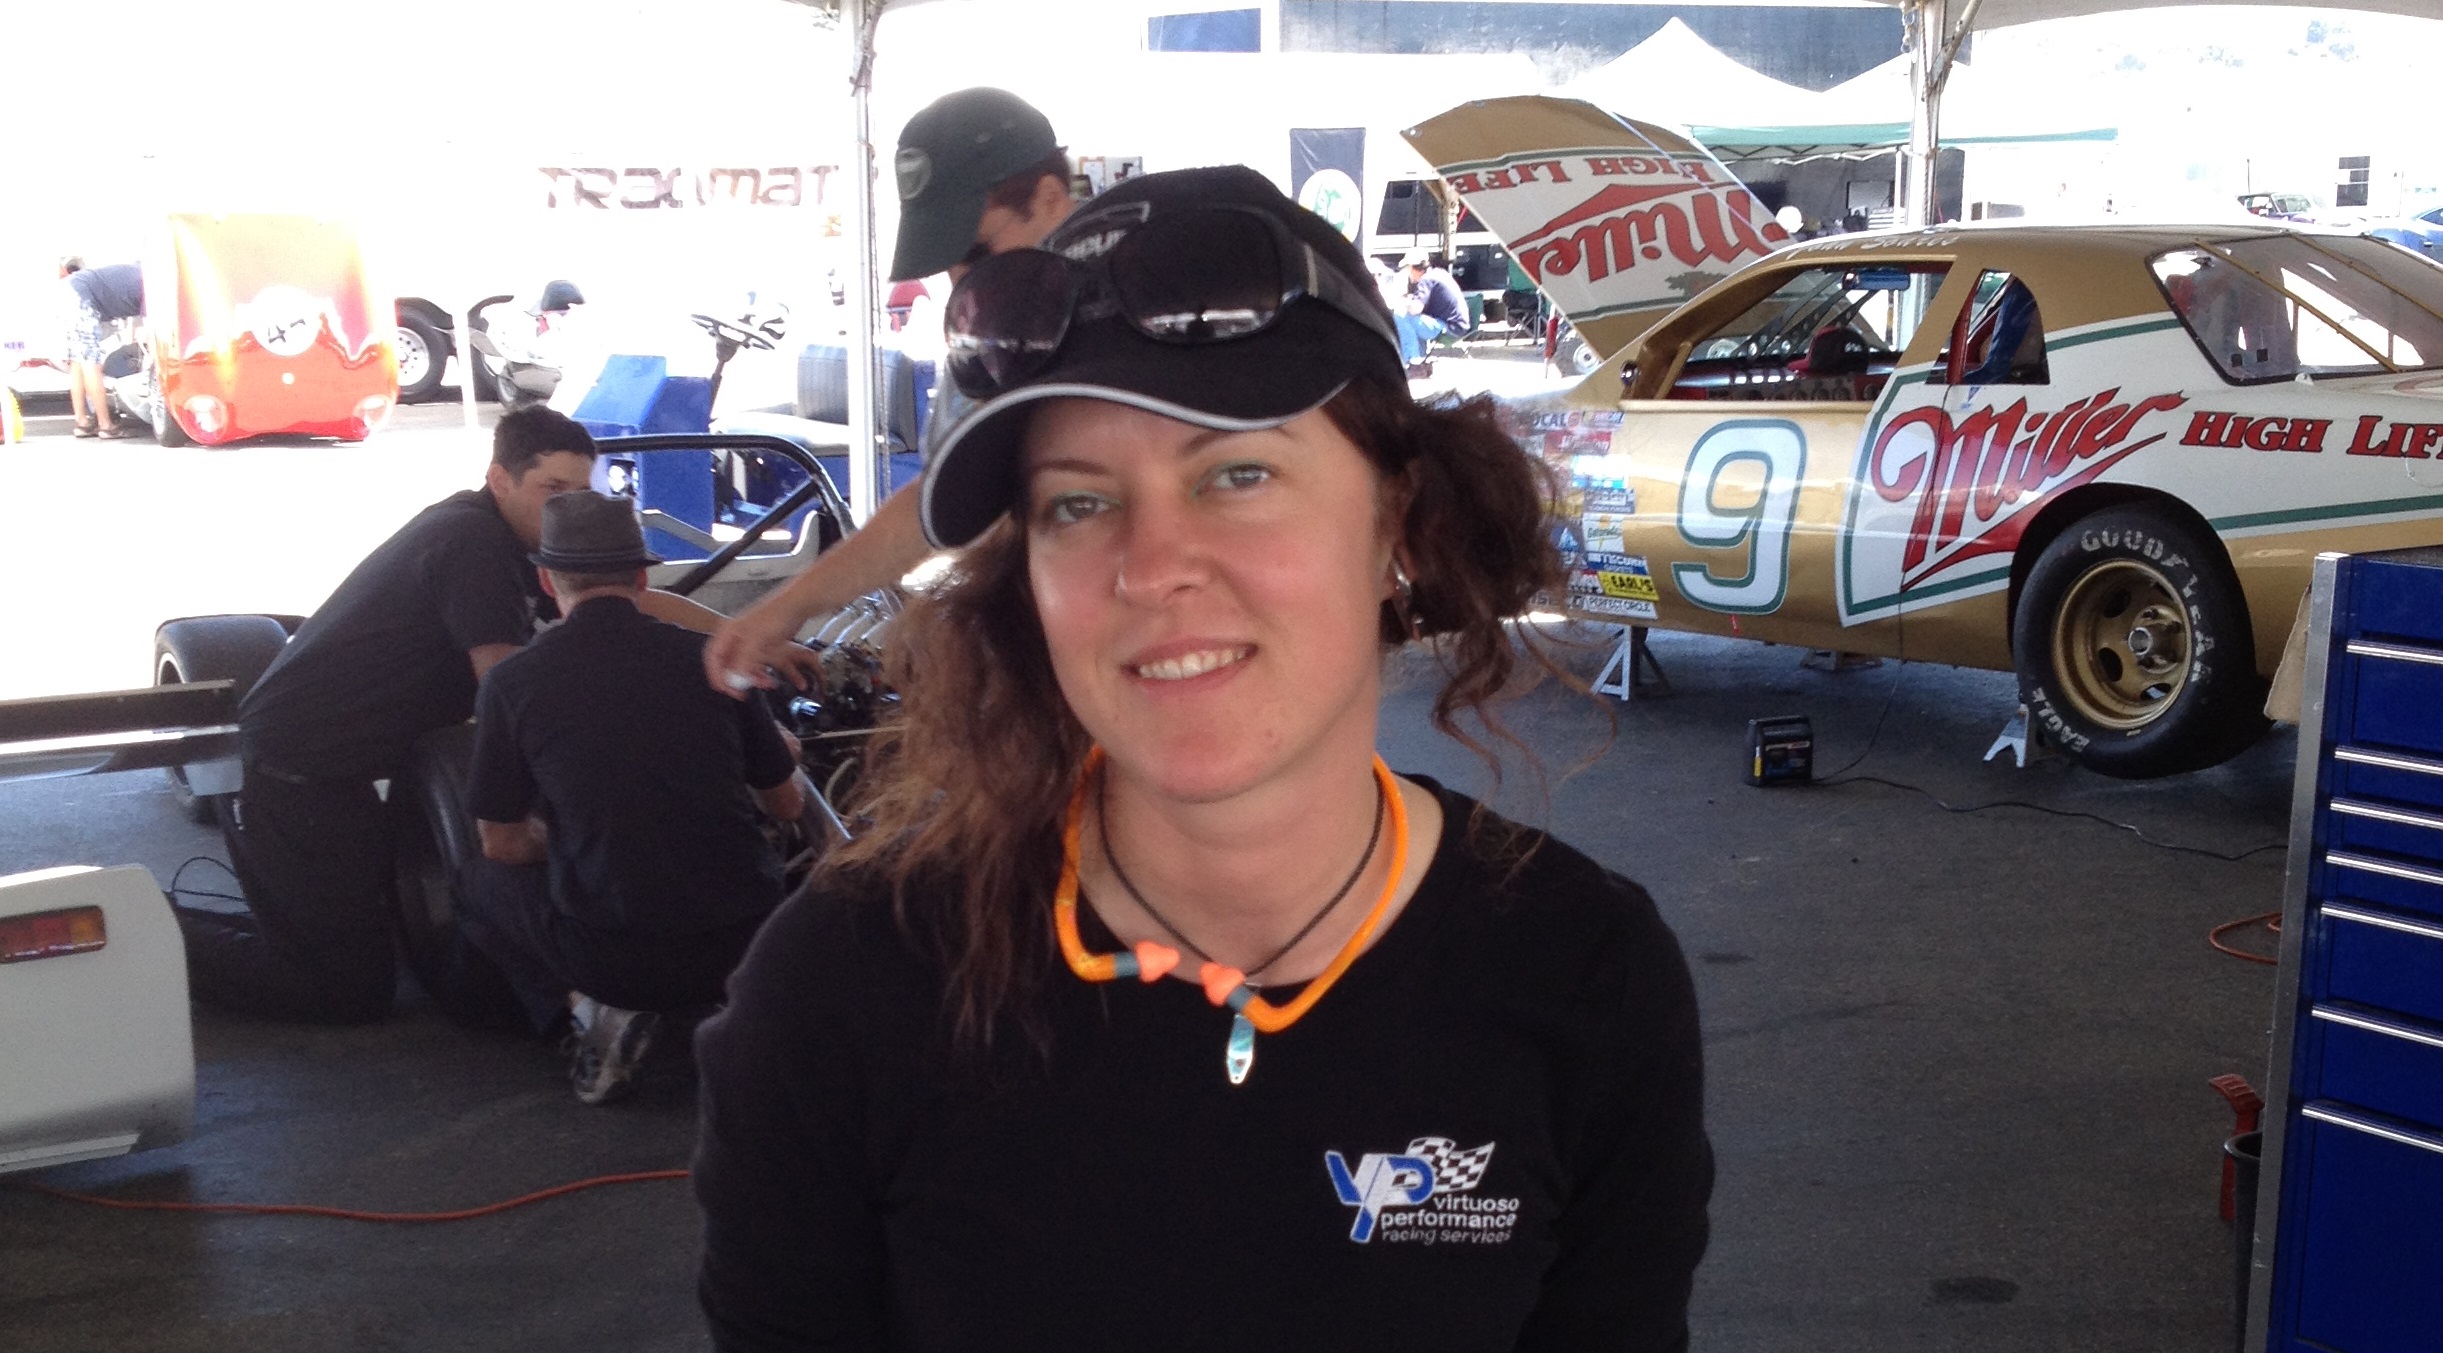 woman sitting on a stack of race wheels, wearing ear protection and safety glasses while in the background you can see a gold colored Nascar car jacked up with the hood open